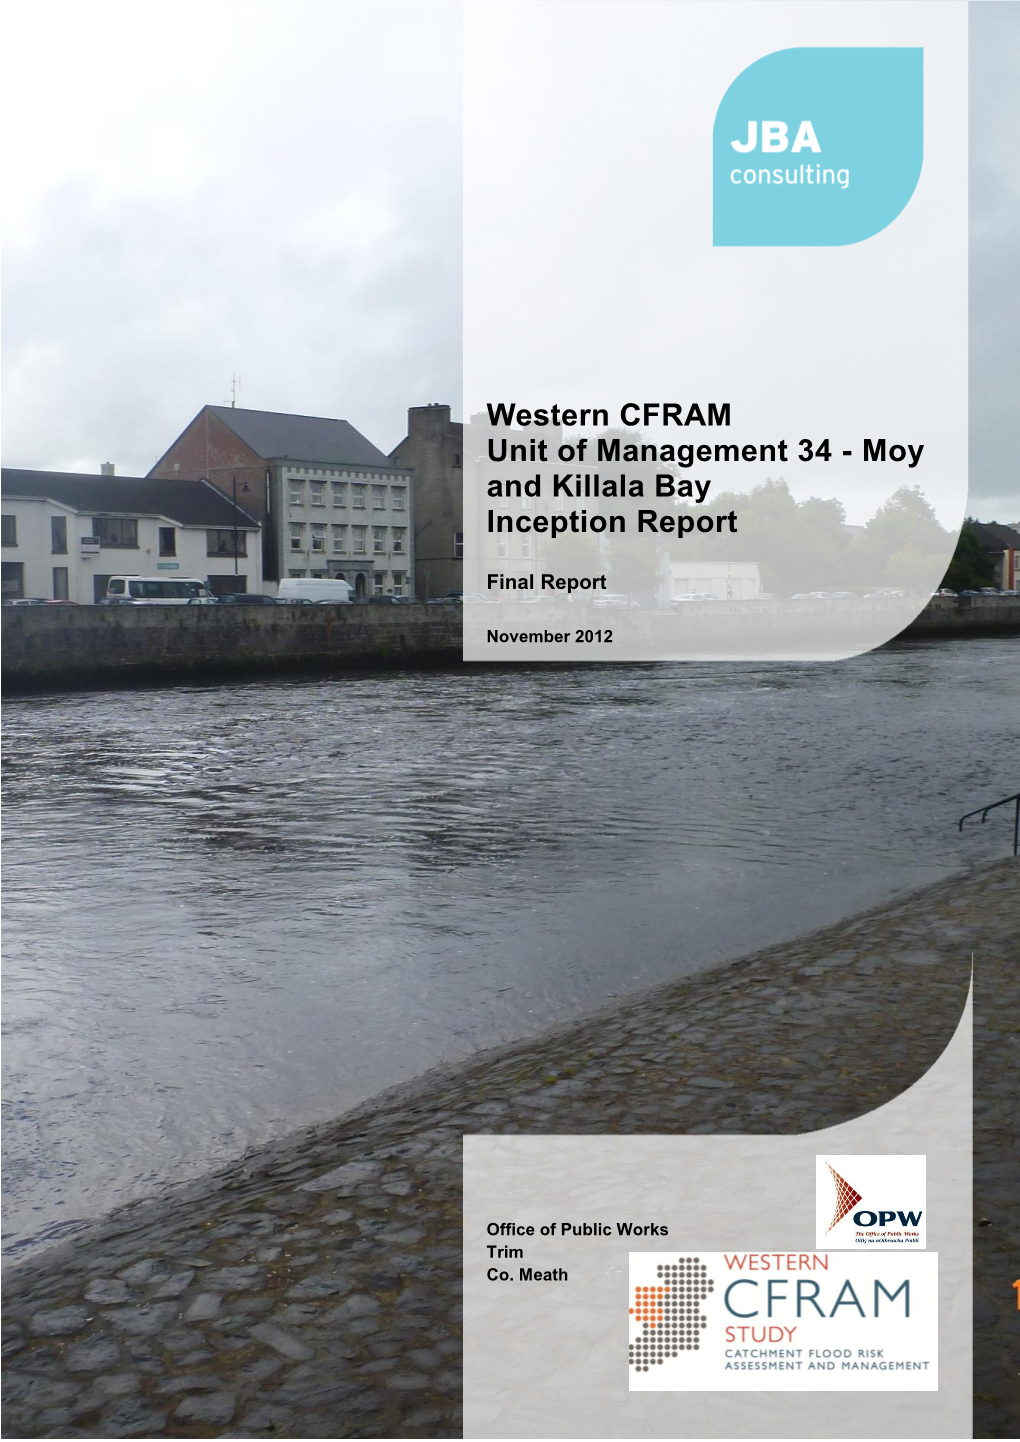 Western CFRAM Unit of Management 34 - Moy and Killala Bay Inception Report